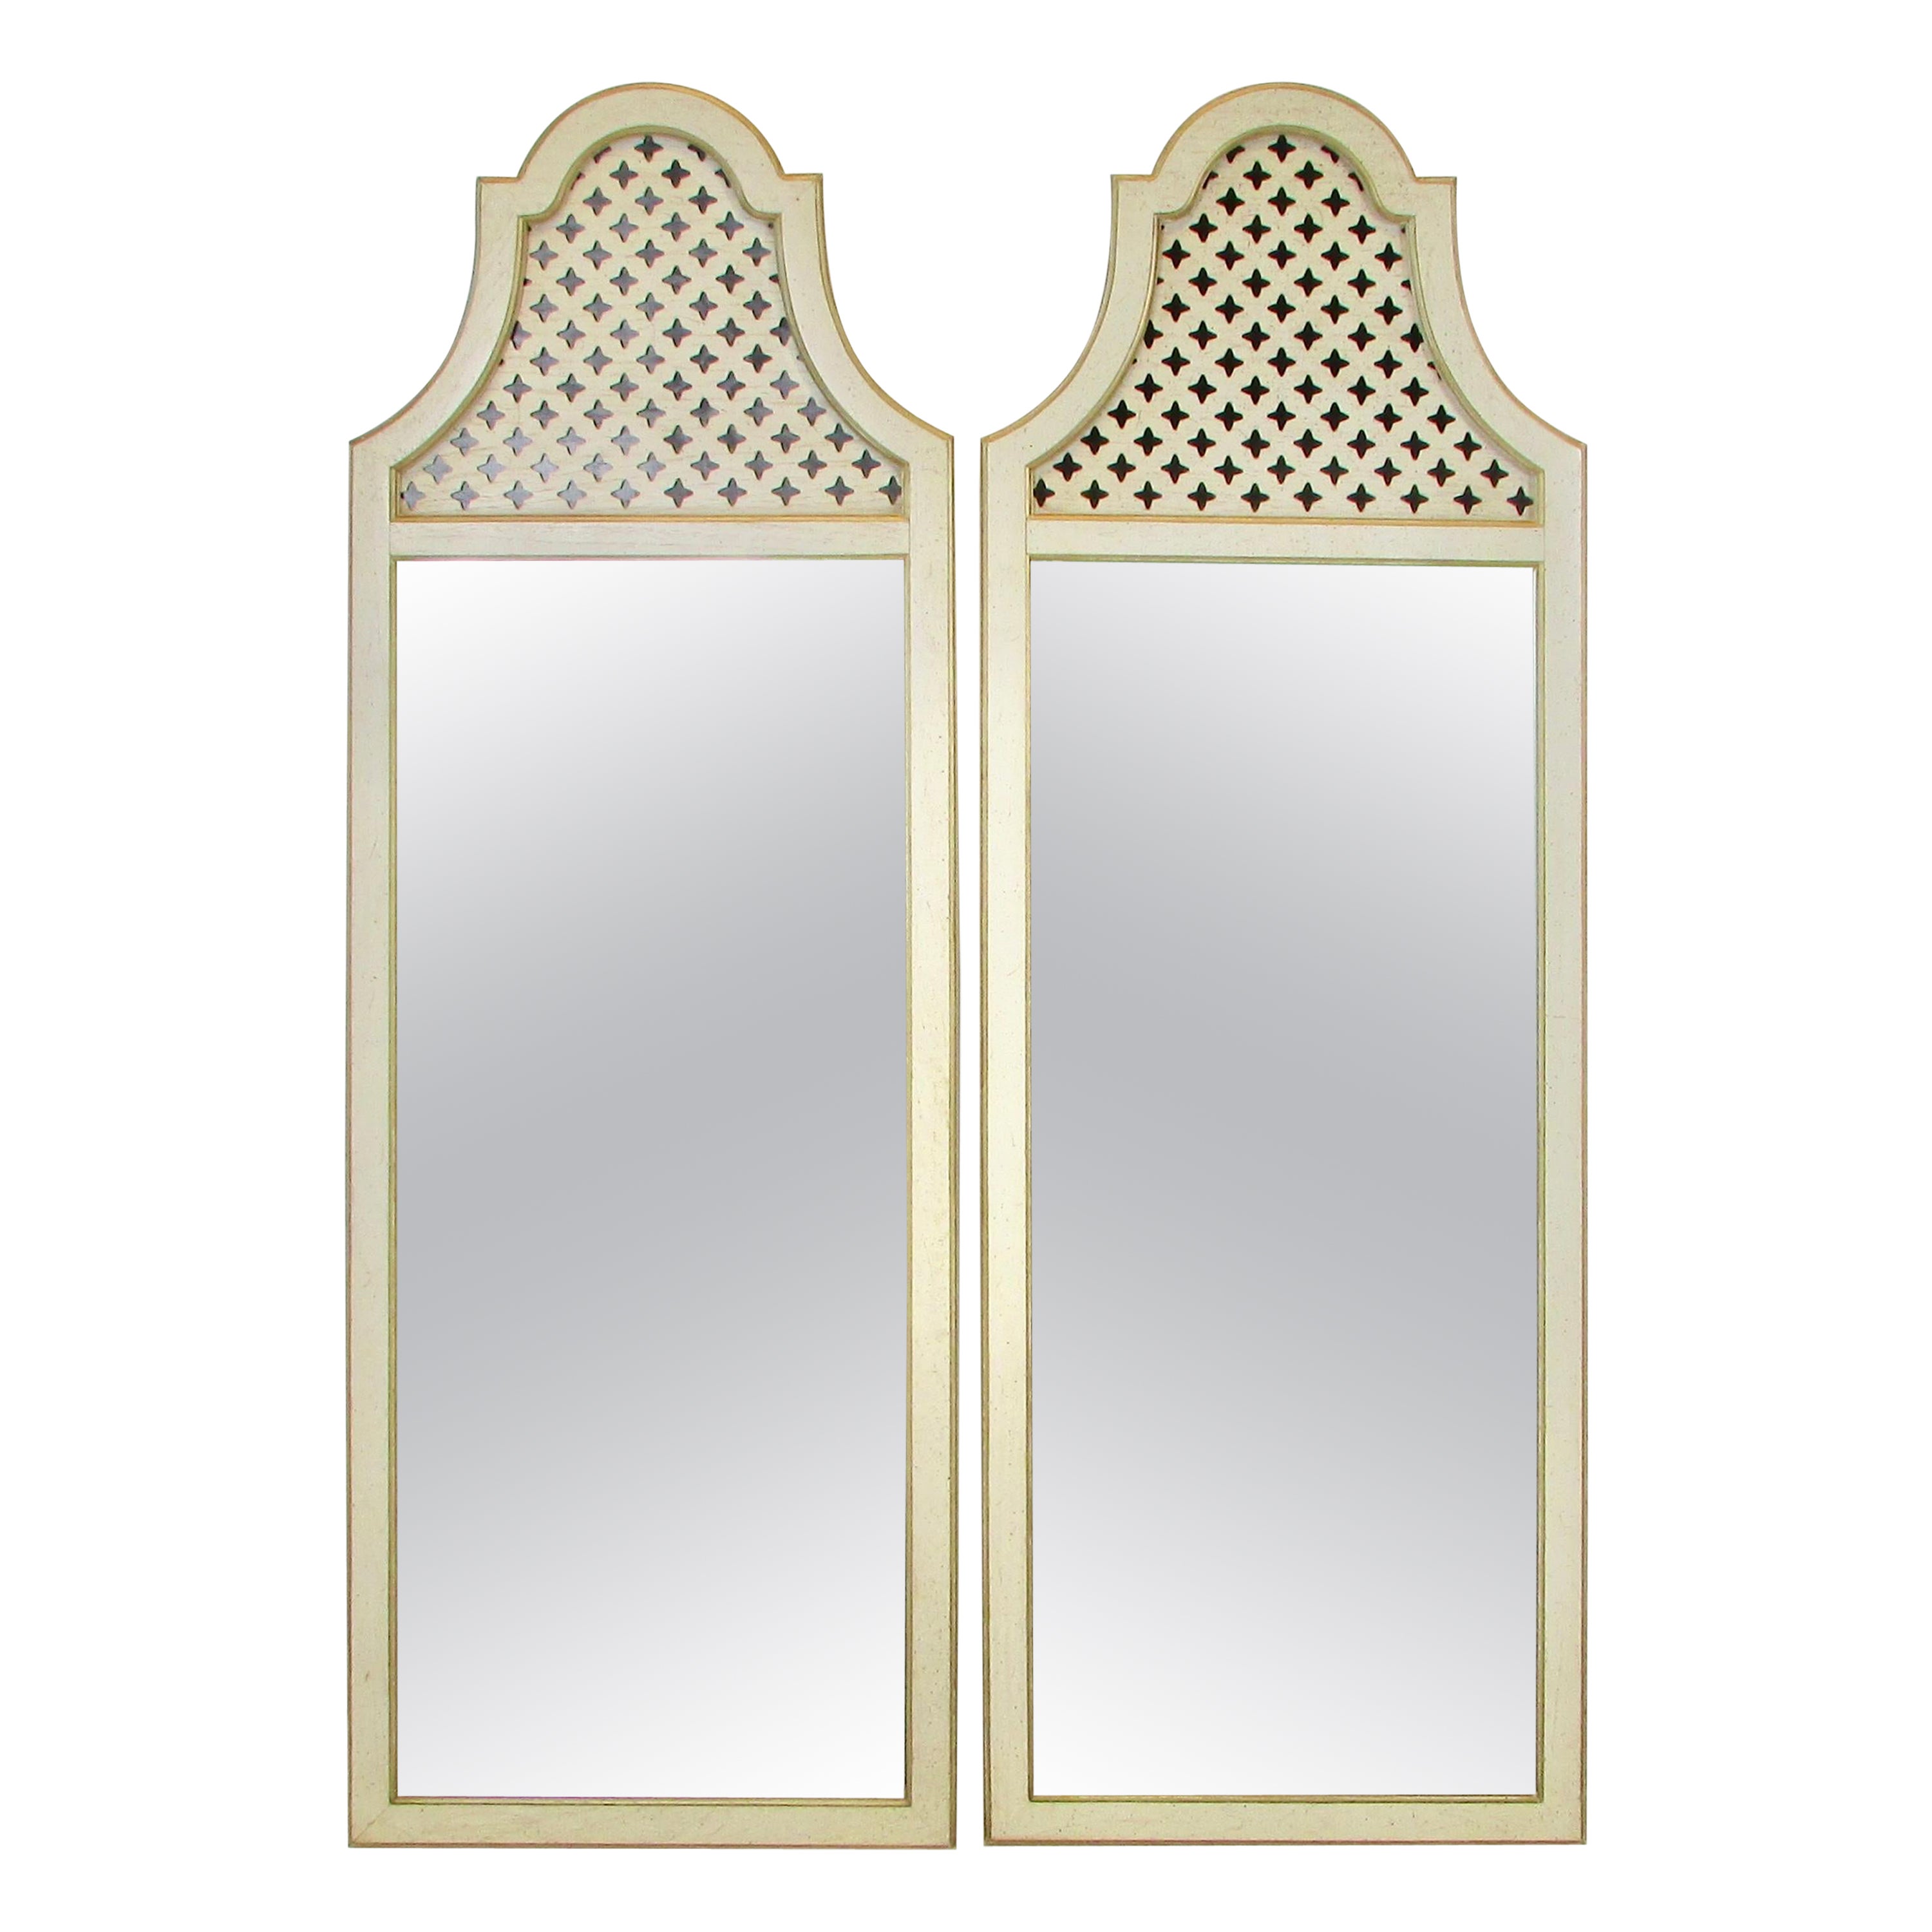 1950s Hollywood Regency Fretwork Style Mirror Pair For Sale